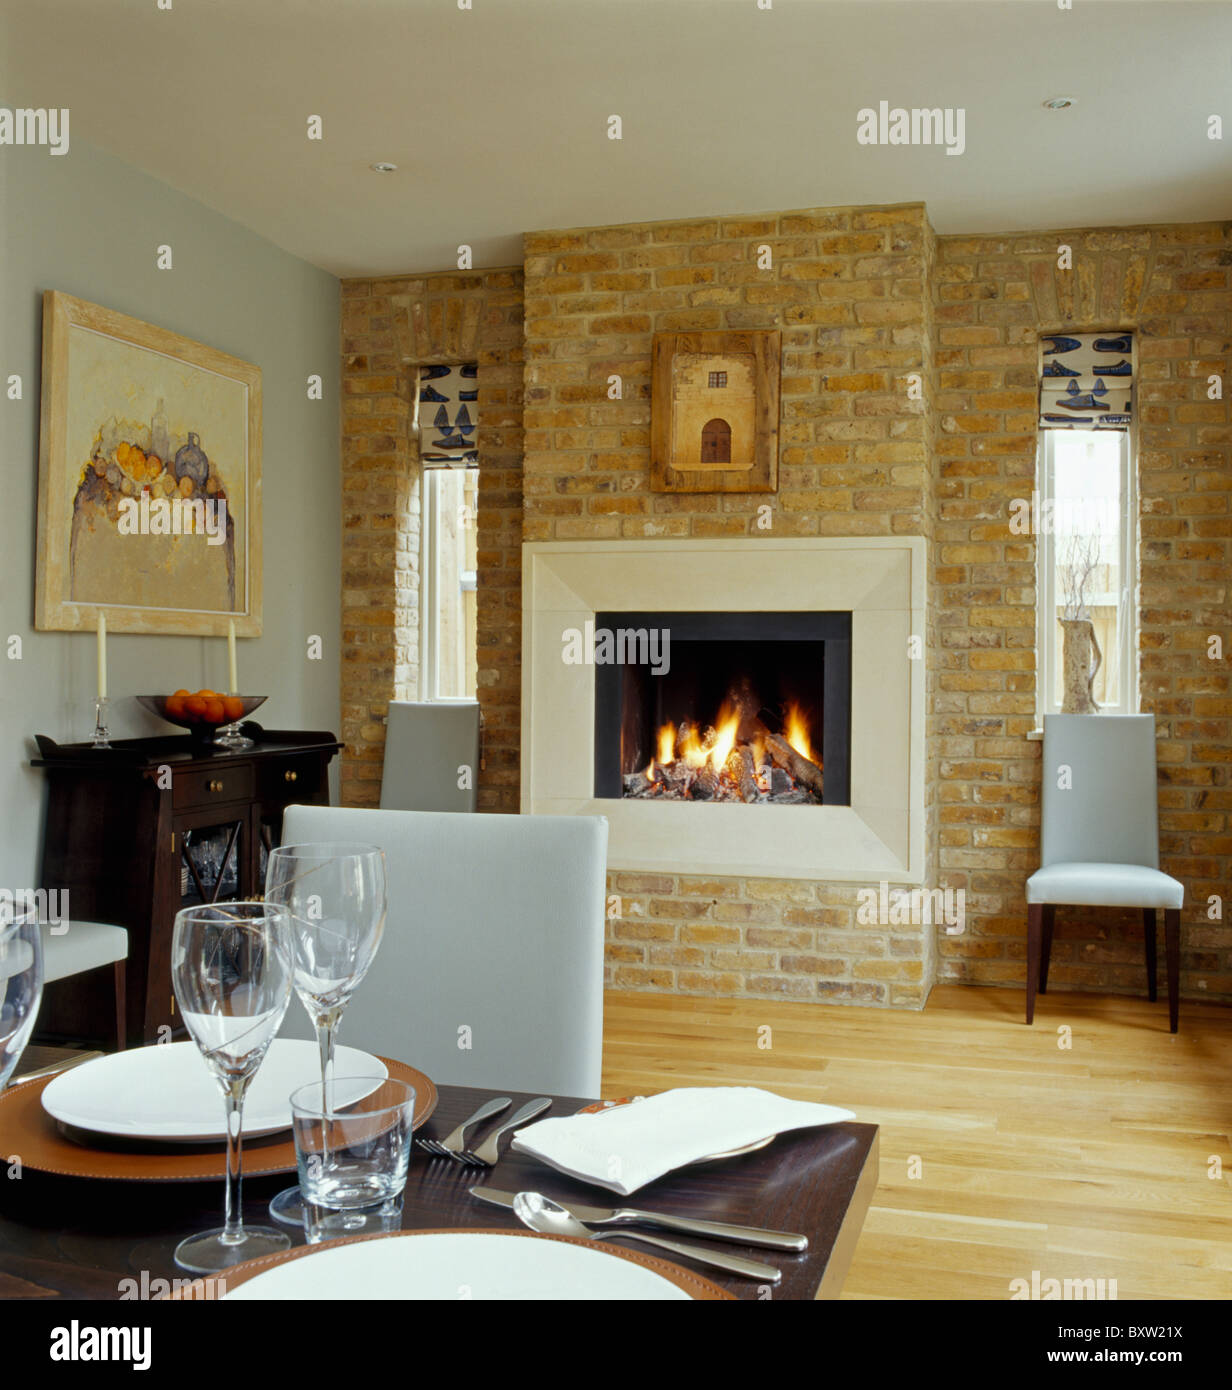 Lighted fire in fireplace in exposed brick wall in modern dining room with white leather dining chairs and wooden flooring Stock Photo